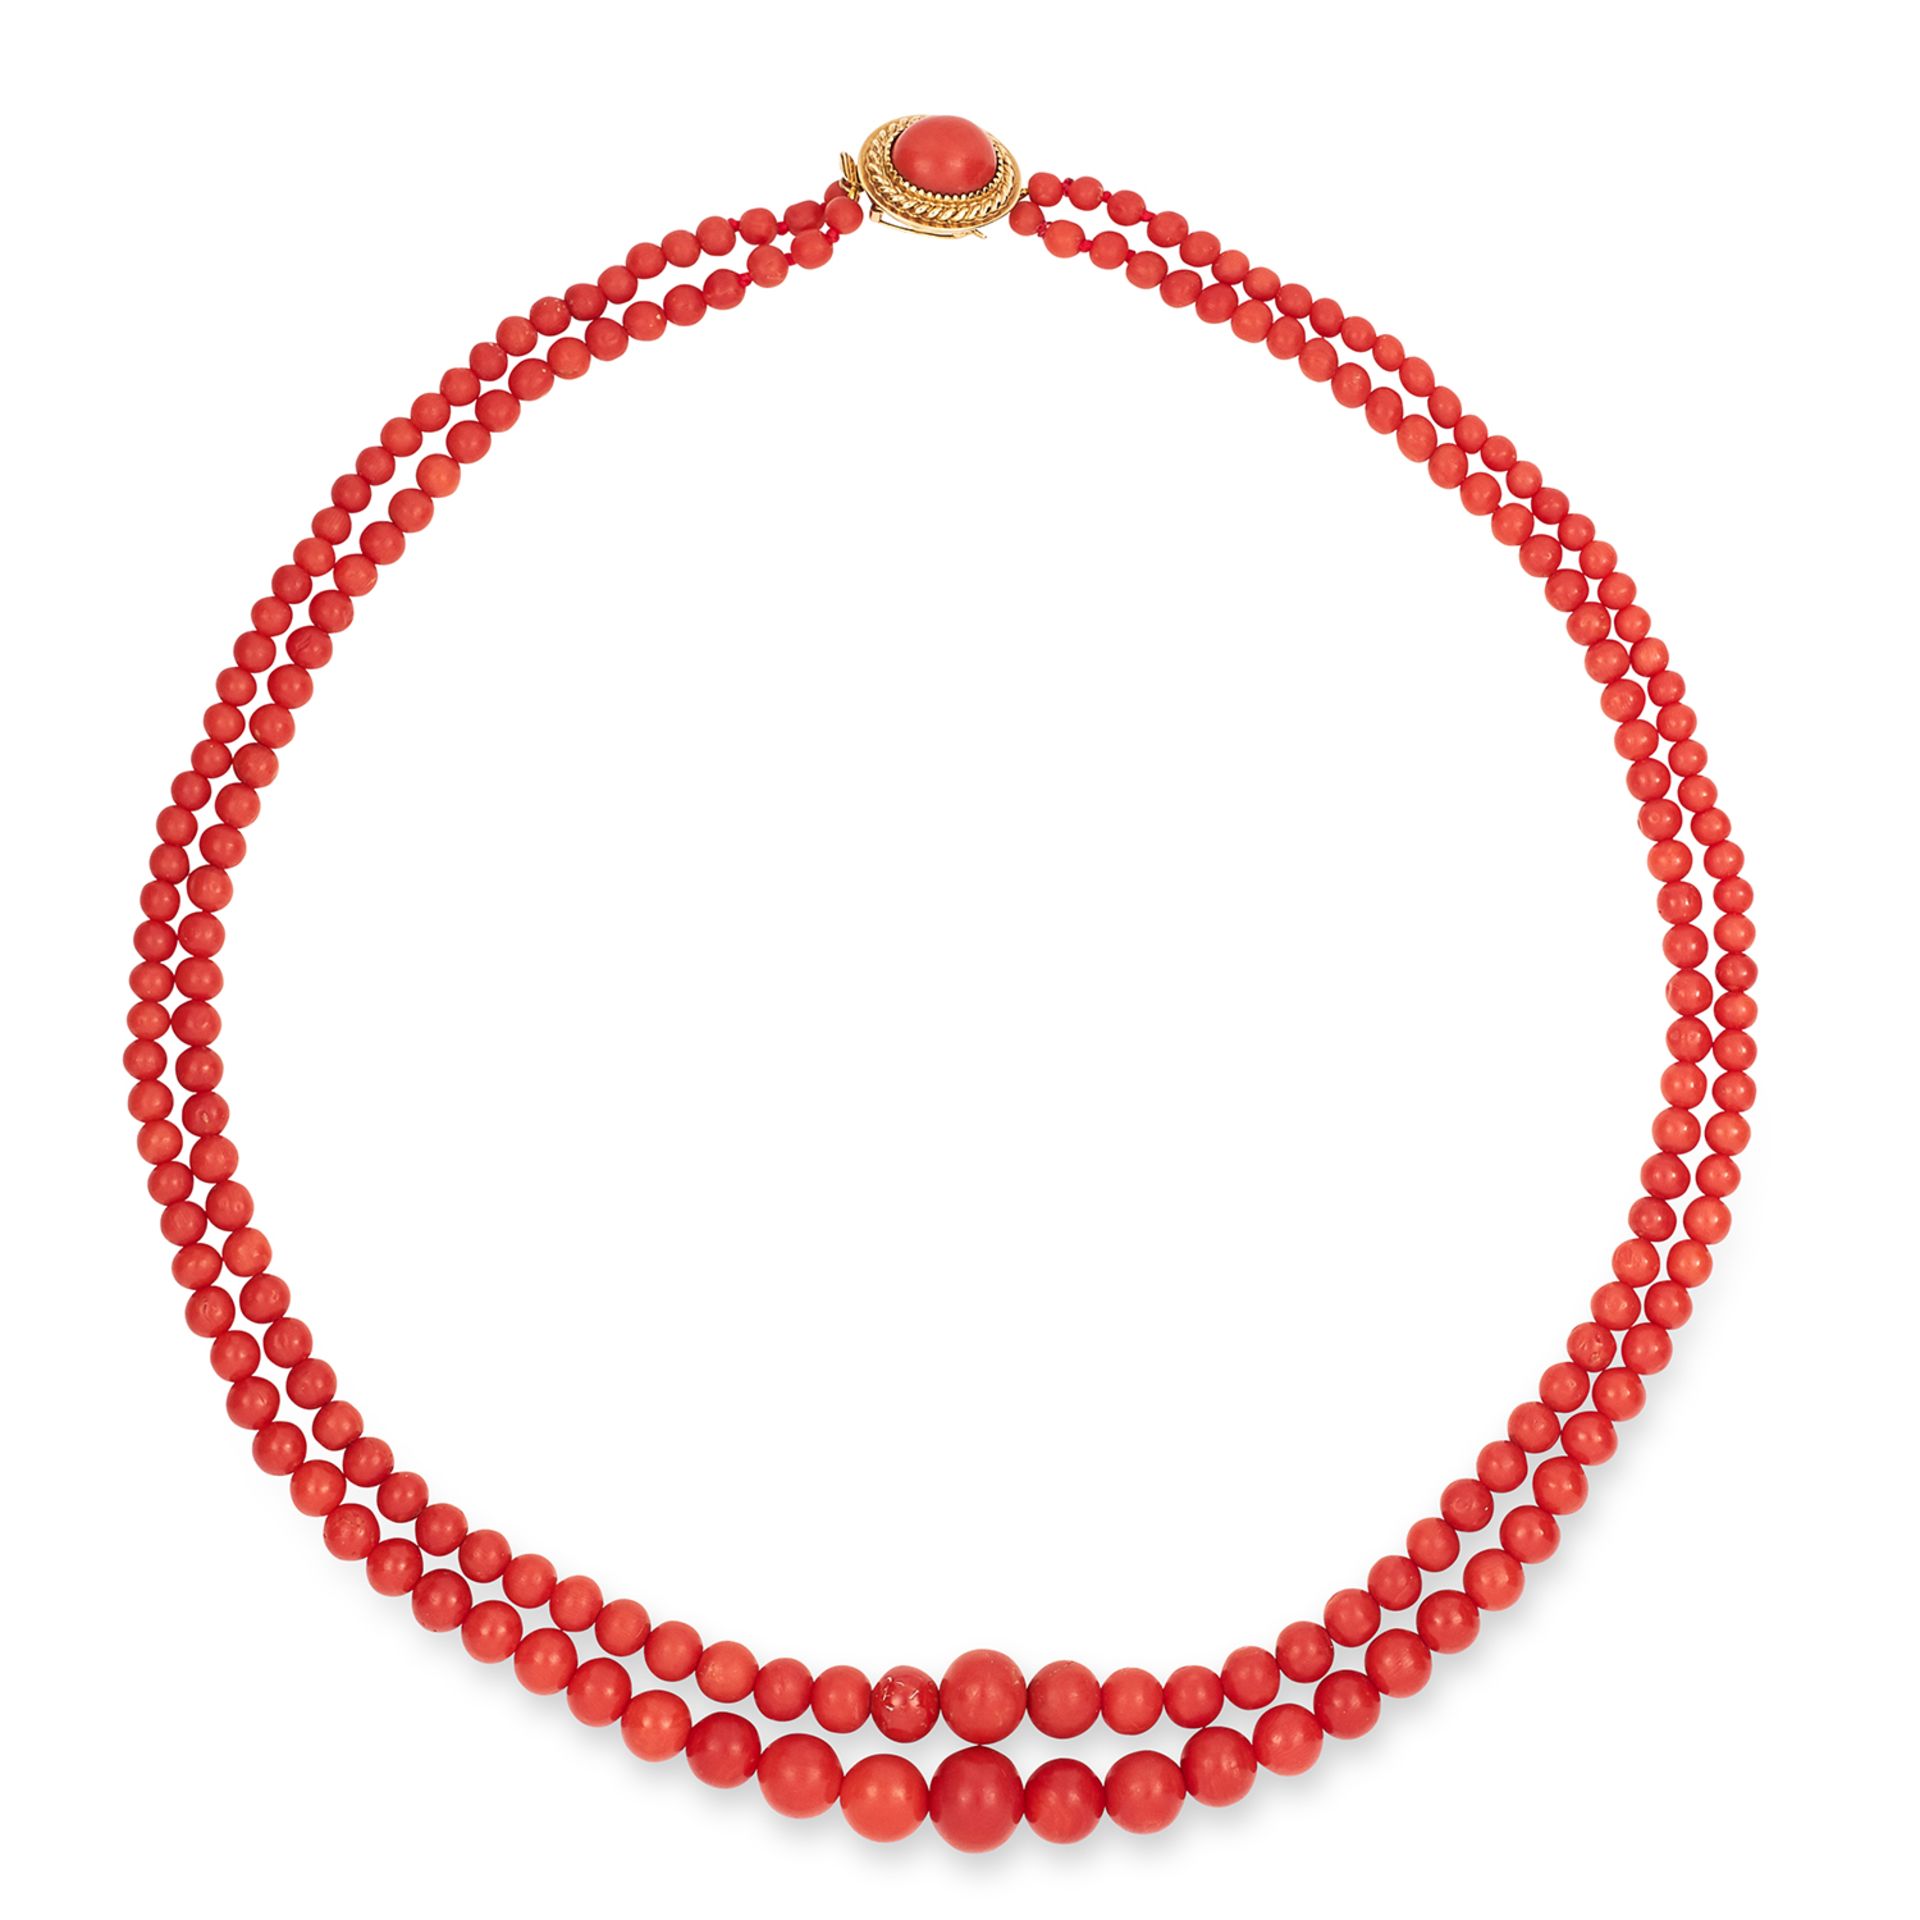 ANTIQUE TWO ROW CORAL BEAD NECKLACE CIRCA 1870 the two rows of coral beads graduating 3.9-10.9mm,